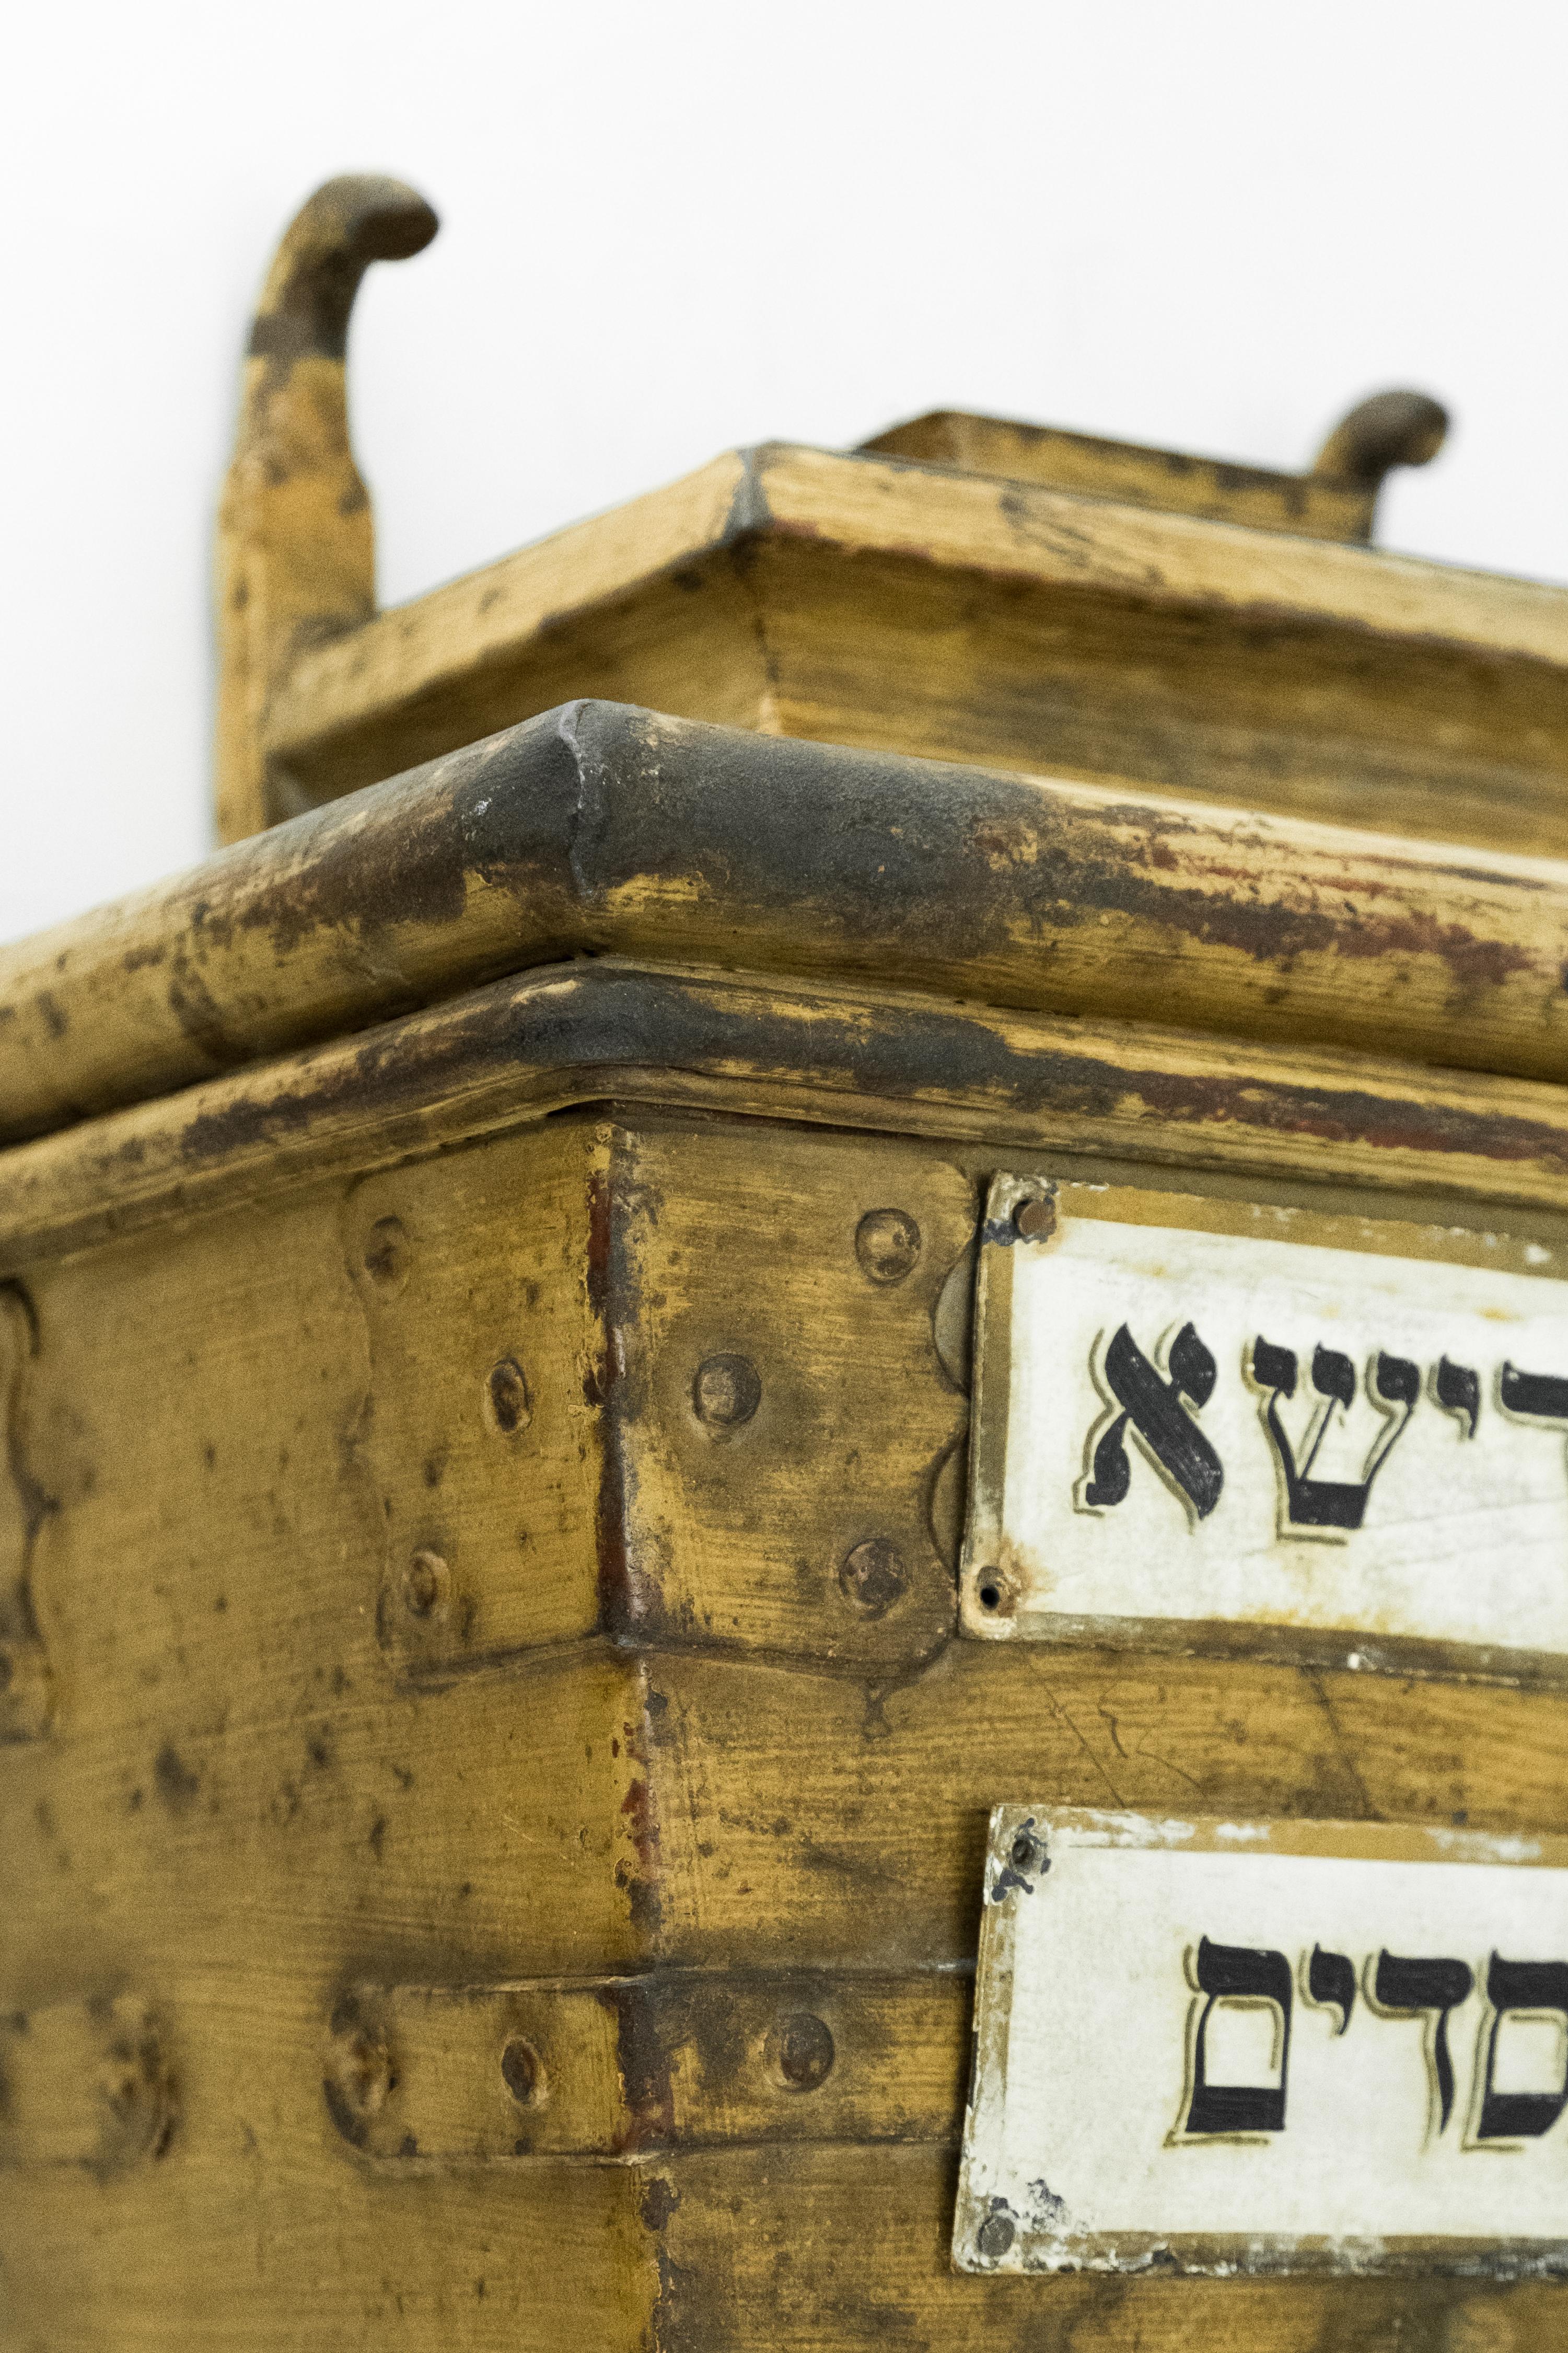 Large handmade iron charity container, Hungary, circa 1850.
The iron tzedakah box was installed within the wall at the Hungarian Synagogue.
On the front two metal plaques inscribed in Hebrew 